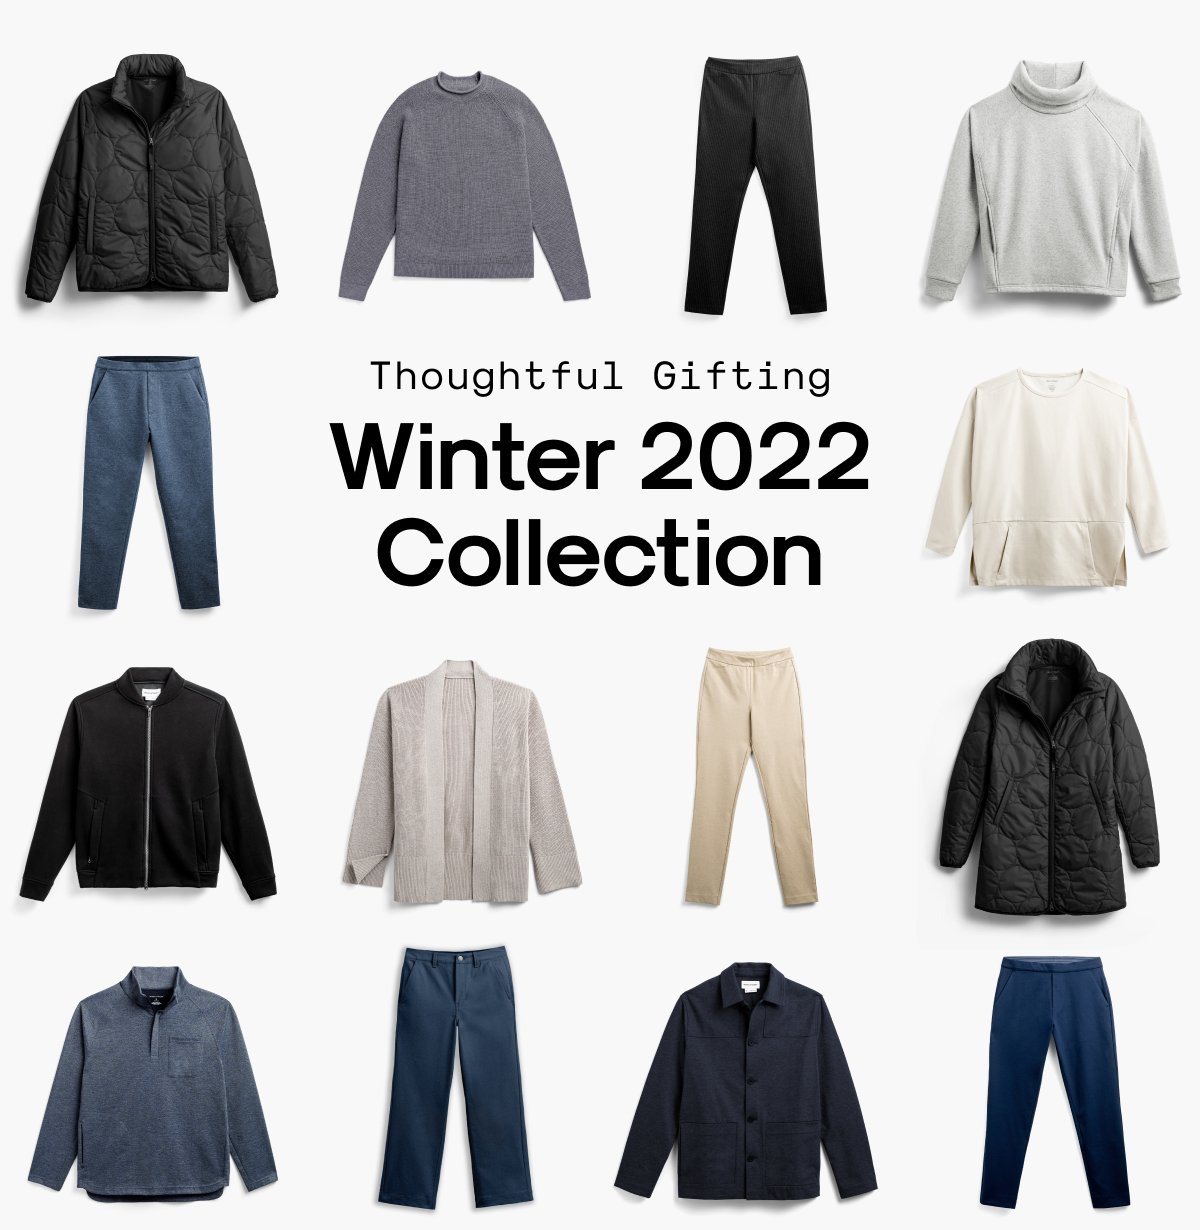 Thoughtful Gifting: Winter 2022 Collection